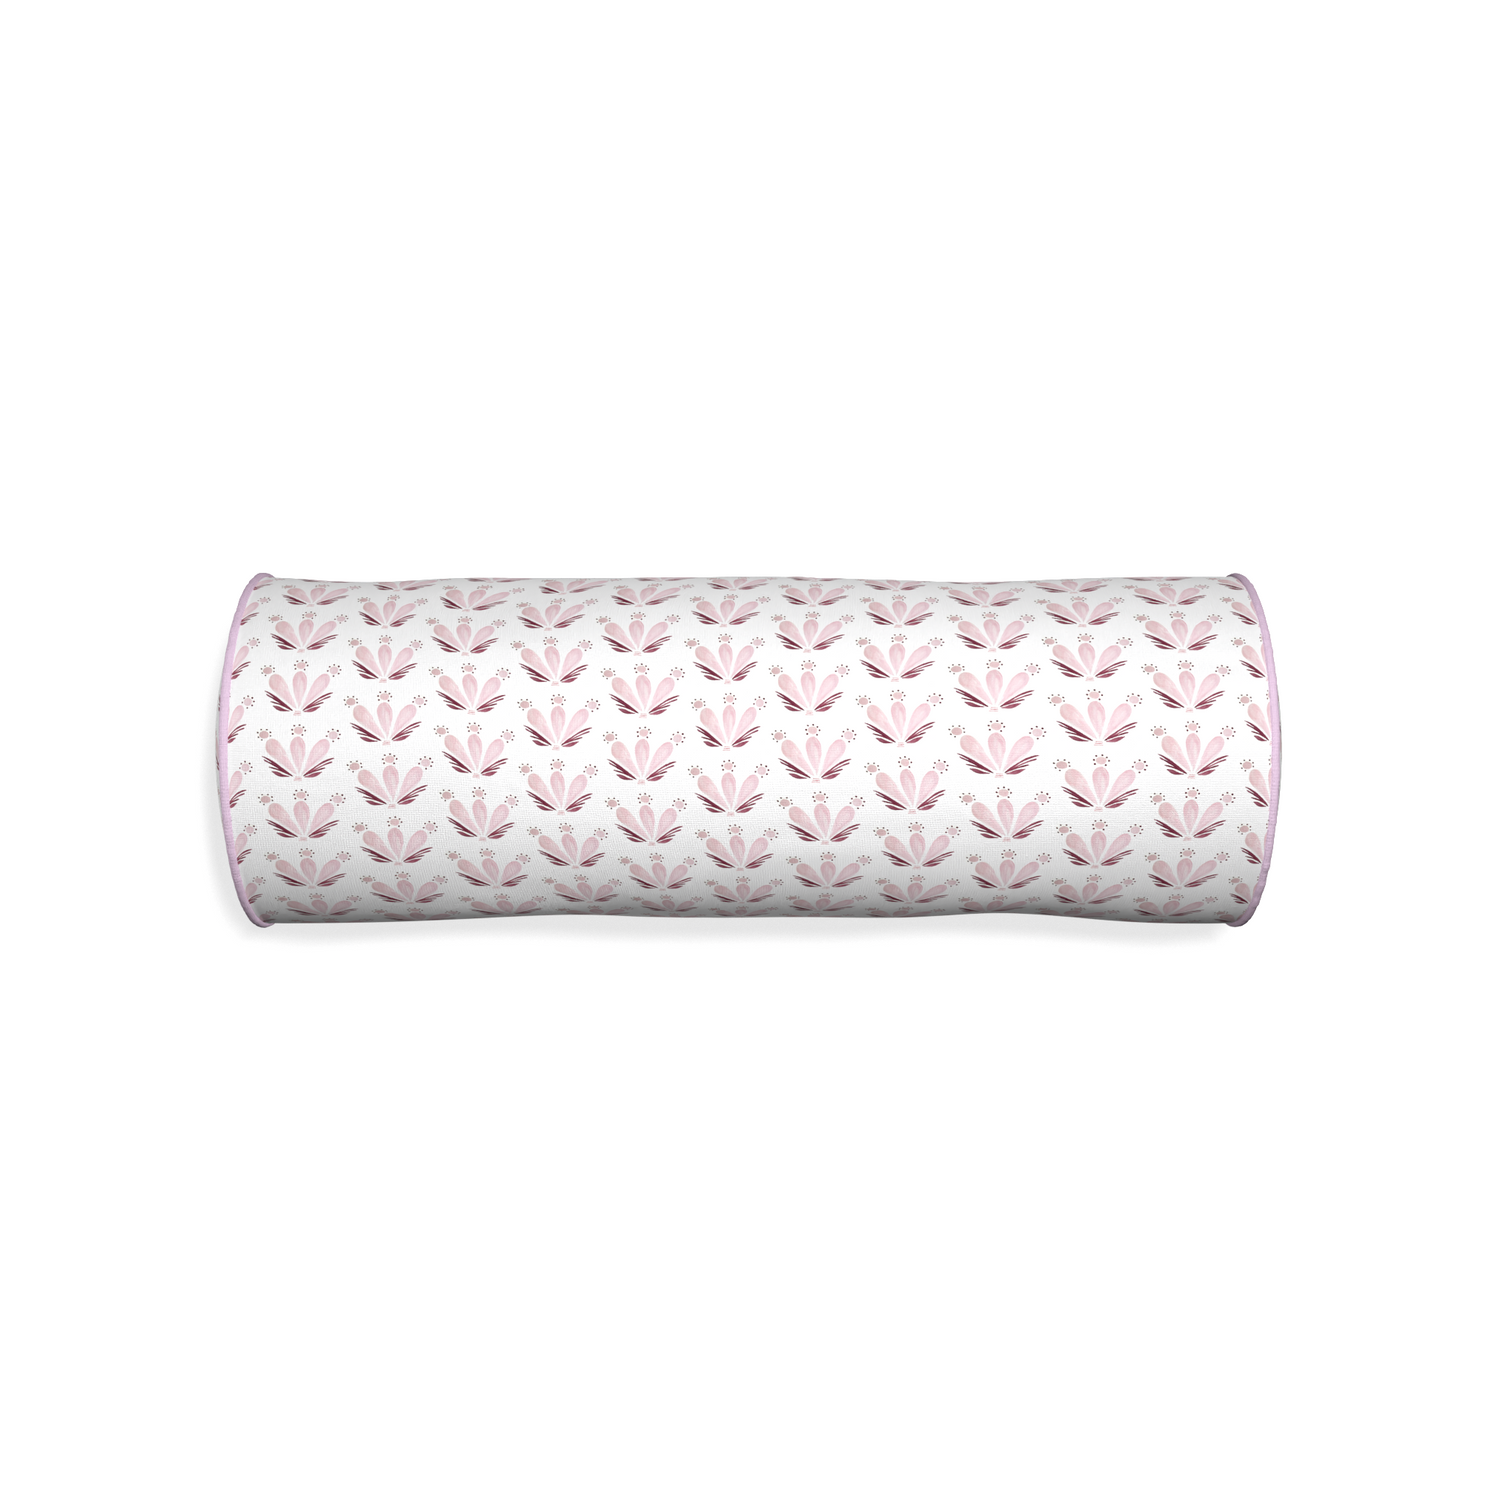 Bolster serena pink custom pillow with l piping on white background